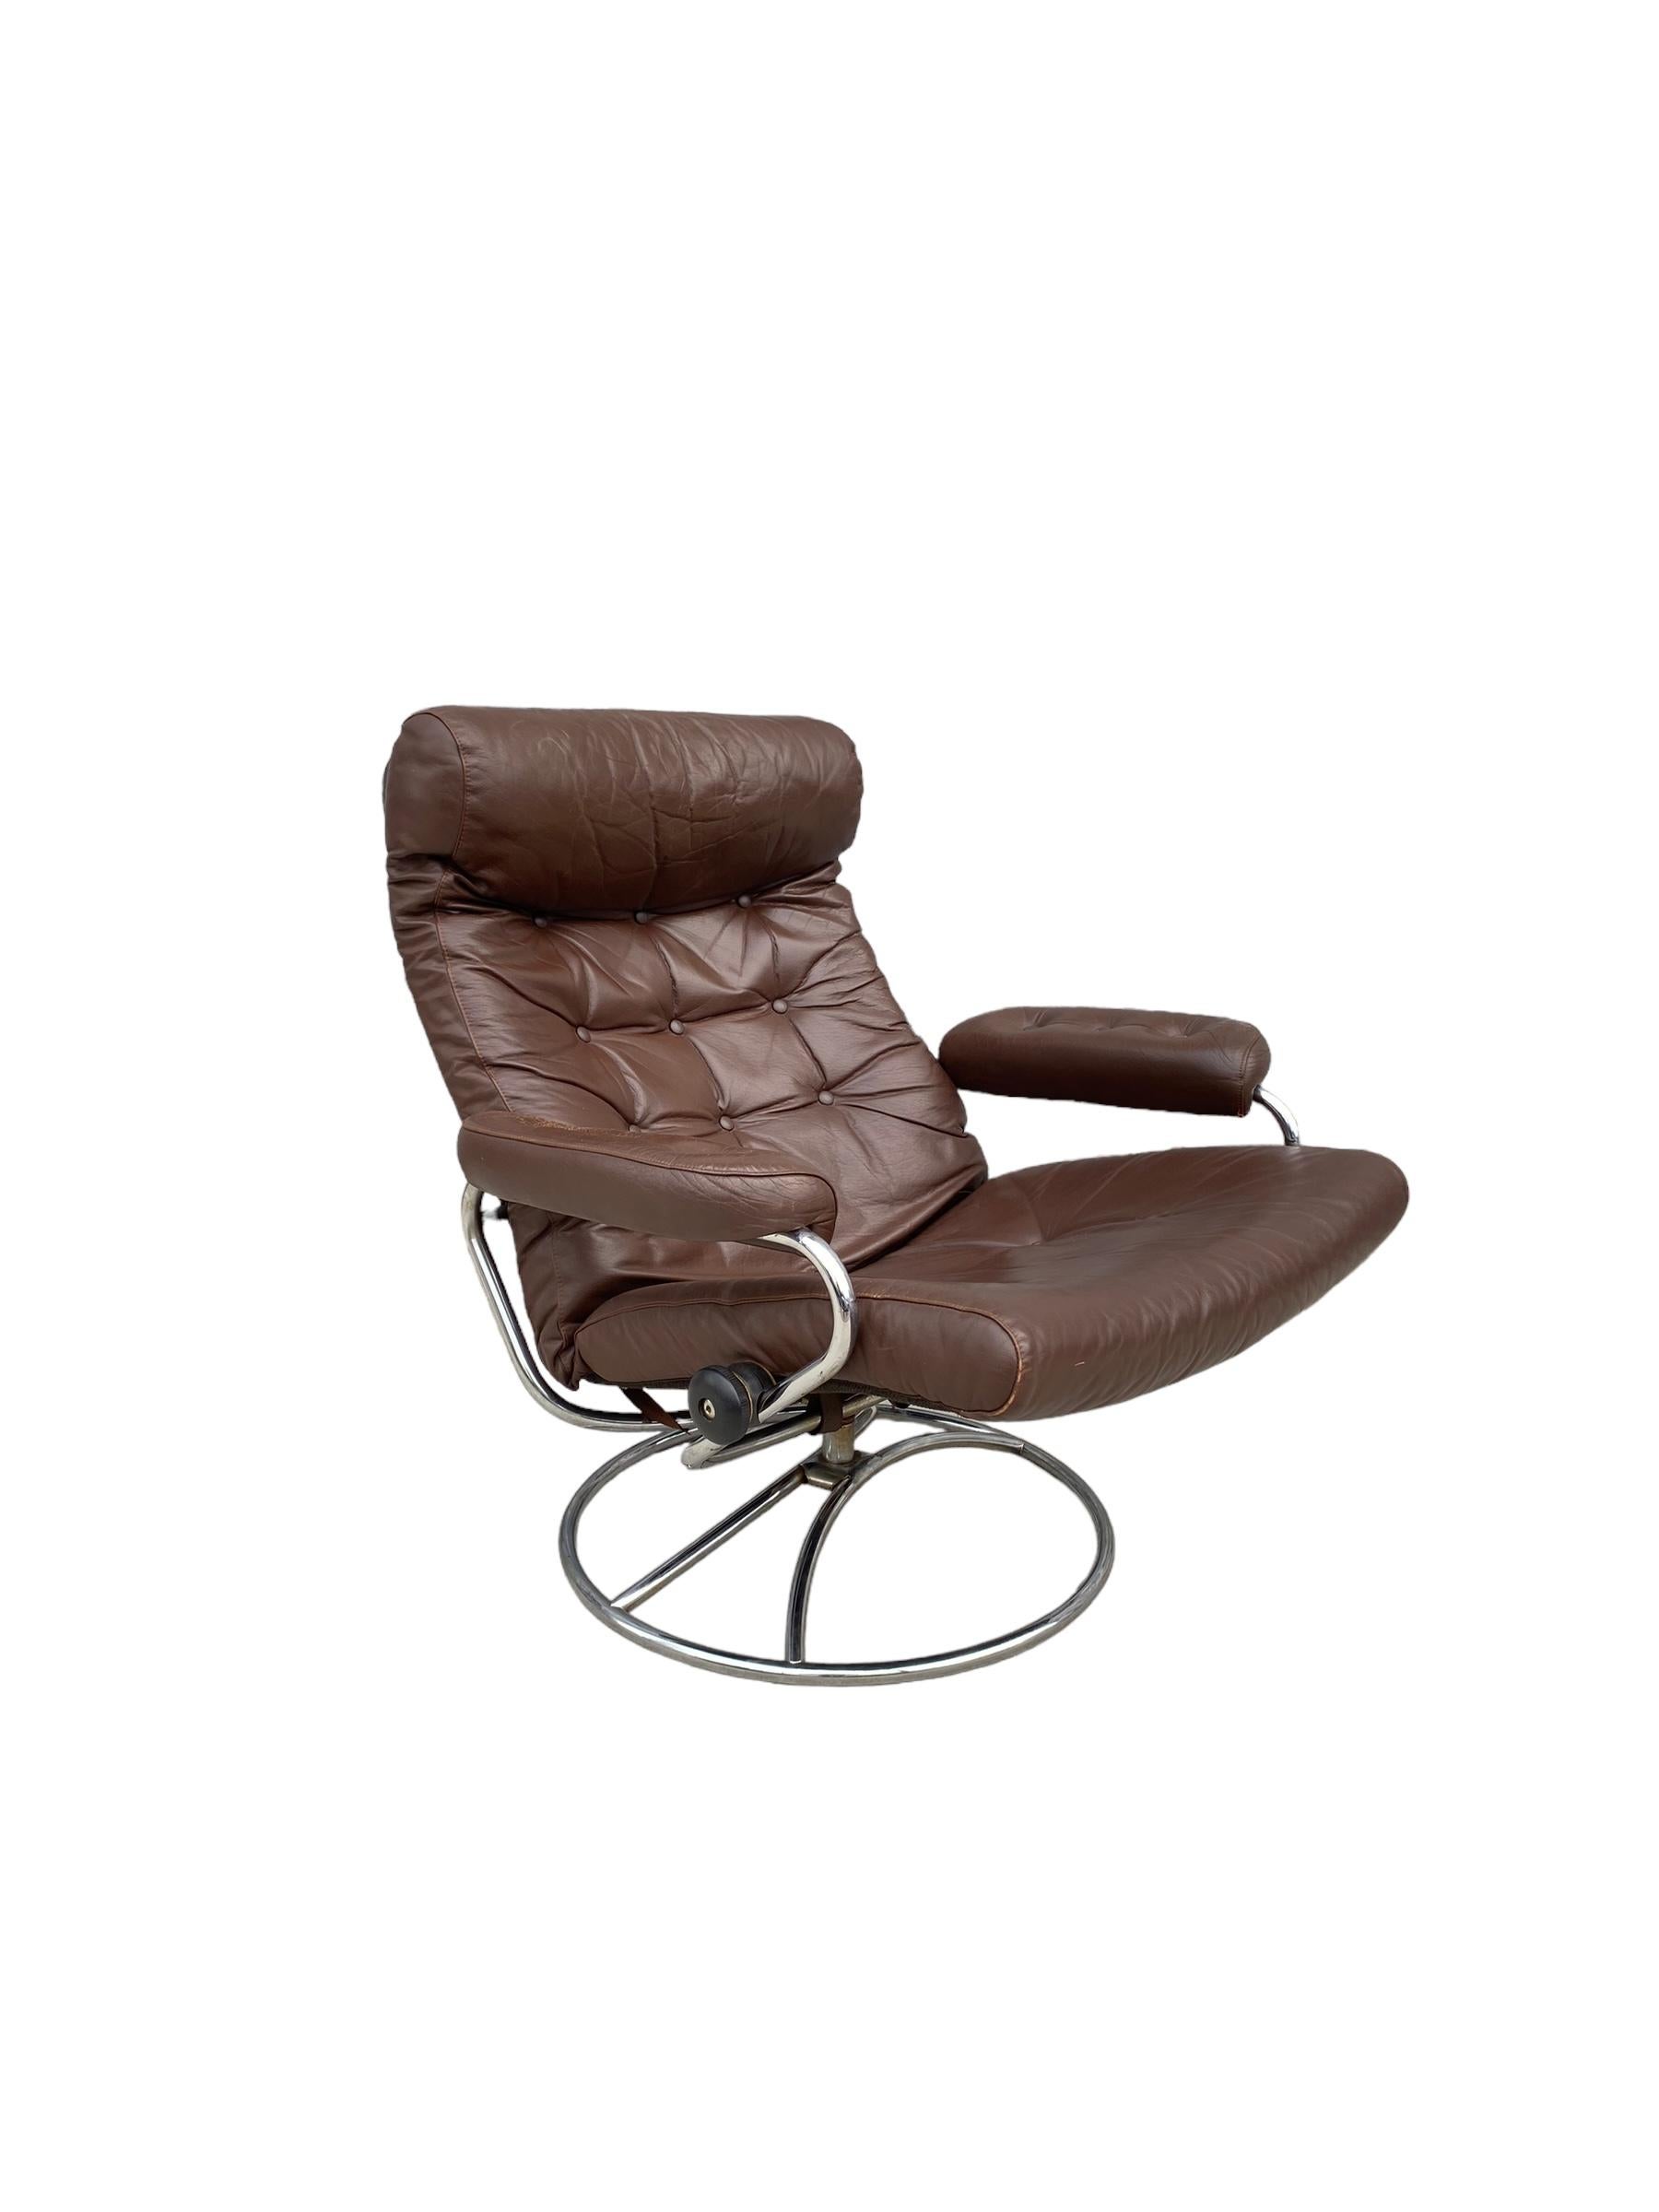 Mid-Century Modern Ekornes Stressless Reclining Lounge Chair and Ottoman For Sale